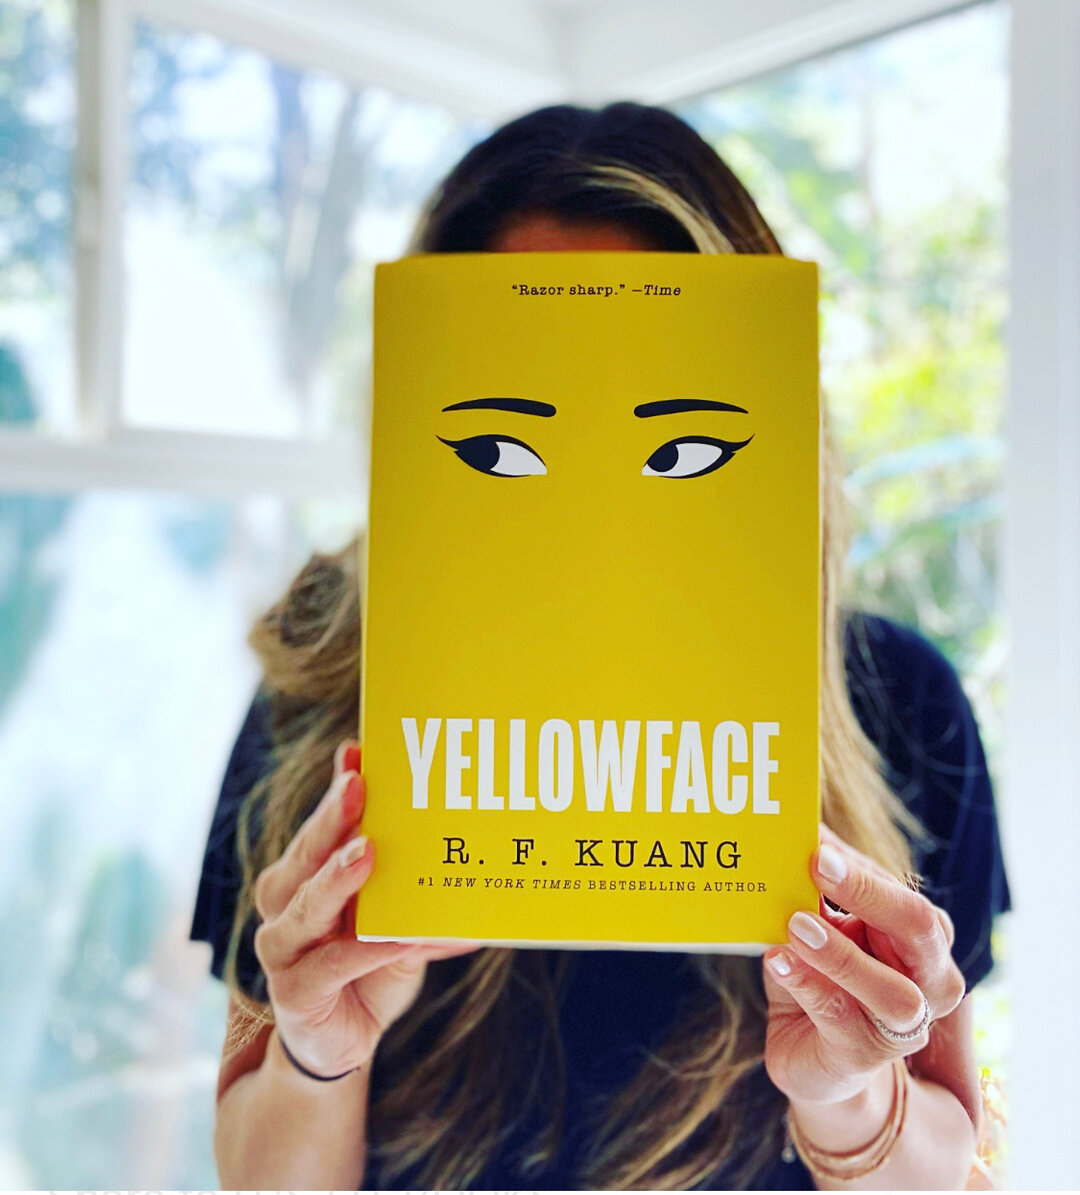 Yellowface|by R.F. Kuang​​​​​​​​
​​​​​​​​
REVIEW: Run out and read this ​​​​​​​​
#ITSLITBOOKSREVIEW​​​​​​​​
​​​​​​​​
SYNOPSIS: June Hayward is a struggling author jealous of her more successful Yalie friend, Athena Liu. When a certain turn of events 